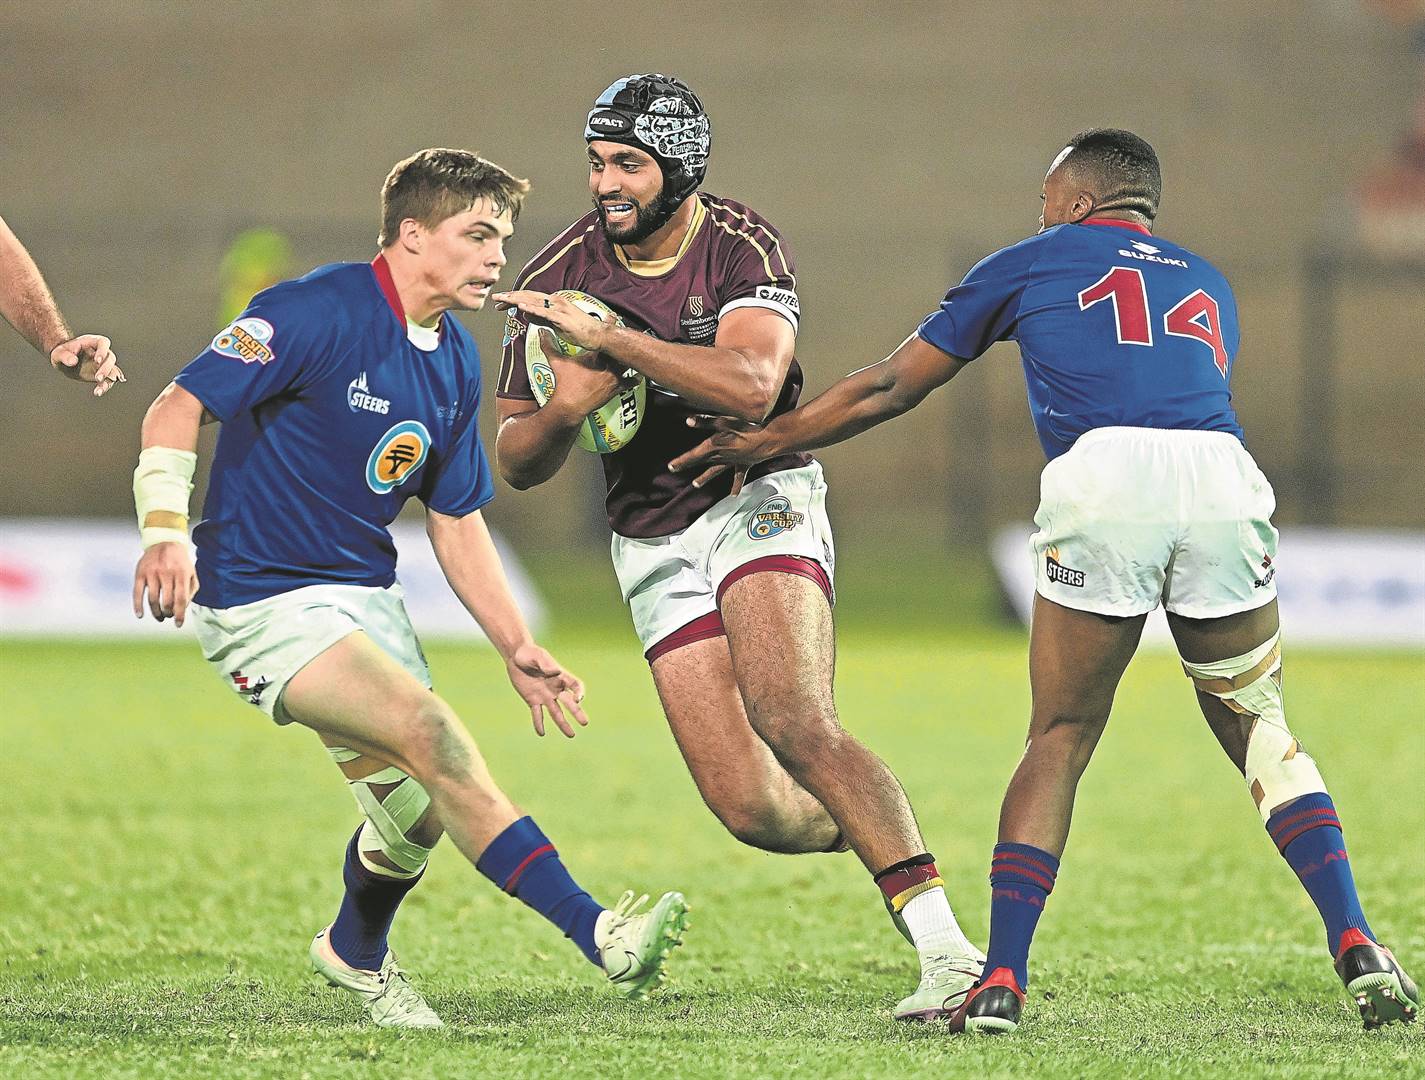 Aydon Topley, centre of FNB Maties, looks to find a gap in the defence of FNB UFS Shimlas in the semi-final of the Varsity Cup at the Danie Craven Stadium in Stellenbosch on Monday (15 April). Topley scored one of Maties’ four tries in their 24-38 defeat against the men from Bloemfontein. The Maroon Machine started slowly, but did well to recover from a 0-12 deficit on the scoreboard after 20 minutes. Their mistakes, however, ultimately cost them the match and a place in the final, as they were outscored by five tries to four. The Varsity Cup final will be contested by FNB UFS Shimlas and FNB UCT Ikeys in Bloemfontein next Monday (22 April). The other try scorers for FNB Maties were Matthys Kitshoff, Ezekiel Ngobeni and Ammaar Burton, while Juan Mostert slotted two conversions. Photo: Luigi Bennett/Varsity Cup